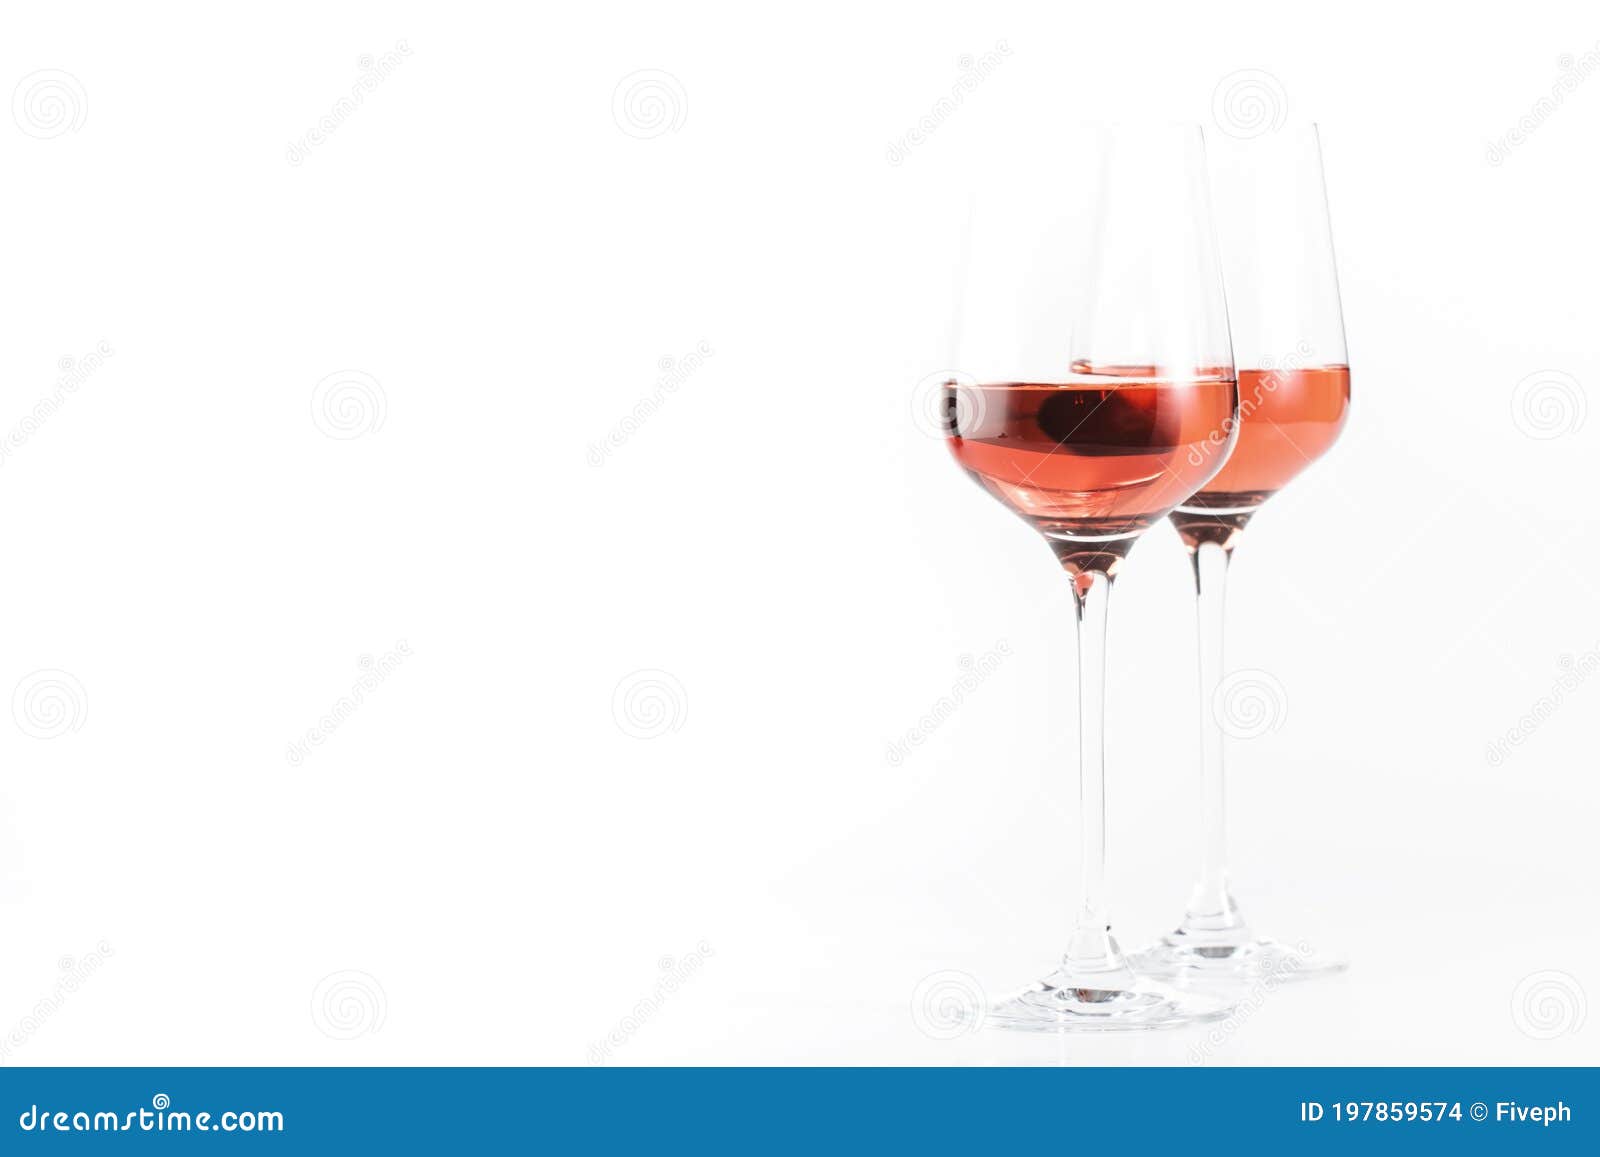 rose wine glass with bottle on the white table. rosado, rosato or blush wine tasting in wineshop, bar concept. copy space